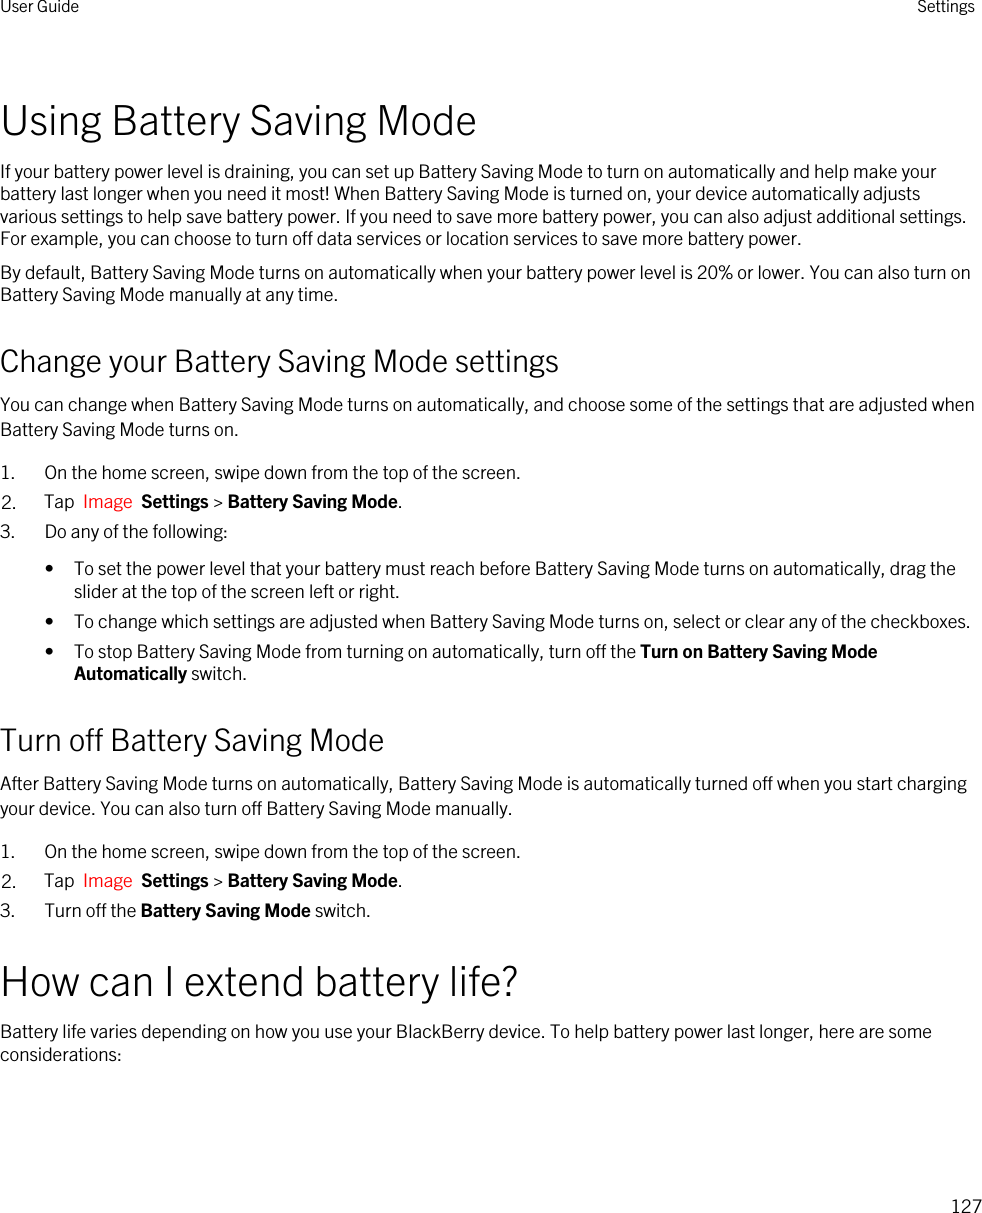 Using Battery Saving ModeIf your battery power level is draining, you can set up Battery Saving Mode to turn on automatically and help make your battery last longer when you need it most! When Battery Saving Mode is turned on, your device automatically adjusts various settings to help save battery power. If you need to save more battery power, you can also adjust additional settings. For example, you can choose to turn off data services or location services to save more battery power.By default, Battery Saving Mode turns on automatically when your battery power level is 20% or lower. You can also turn on Battery Saving Mode manually at any time.Change your Battery Saving Mode settingsYou can change when Battery Saving Mode turns on automatically, and choose some of the settings that are adjusted when Battery Saving Mode turns on.1. On the home screen, swipe down from the top of the screen.2. Tap  Image  Settings &gt; Battery Saving Mode.3. Do any of the following:• To set the power level that your battery must reach before Battery Saving Mode turns on automatically, drag the slider at the top of the screen left or right.• To change which settings are adjusted when Battery Saving Mode turns on, select or clear any of the checkboxes.• To stop Battery Saving Mode from turning on automatically, turn off the Turn on Battery Saving Mode Automatically switch.Turn off Battery Saving ModeAfter Battery Saving Mode turns on automatically, Battery Saving Mode is automatically turned off when you start charging your device. You can also turn off Battery Saving Mode manually.1. On the home screen, swipe down from the top of the screen.2. Tap  Image  Settings &gt; Battery Saving Mode.3. Turn off the Battery Saving Mode switch.How can I extend battery life?Battery life varies depending on how you use your BlackBerry device. To help battery power last longer, here are some considerations:User Guide Settings127